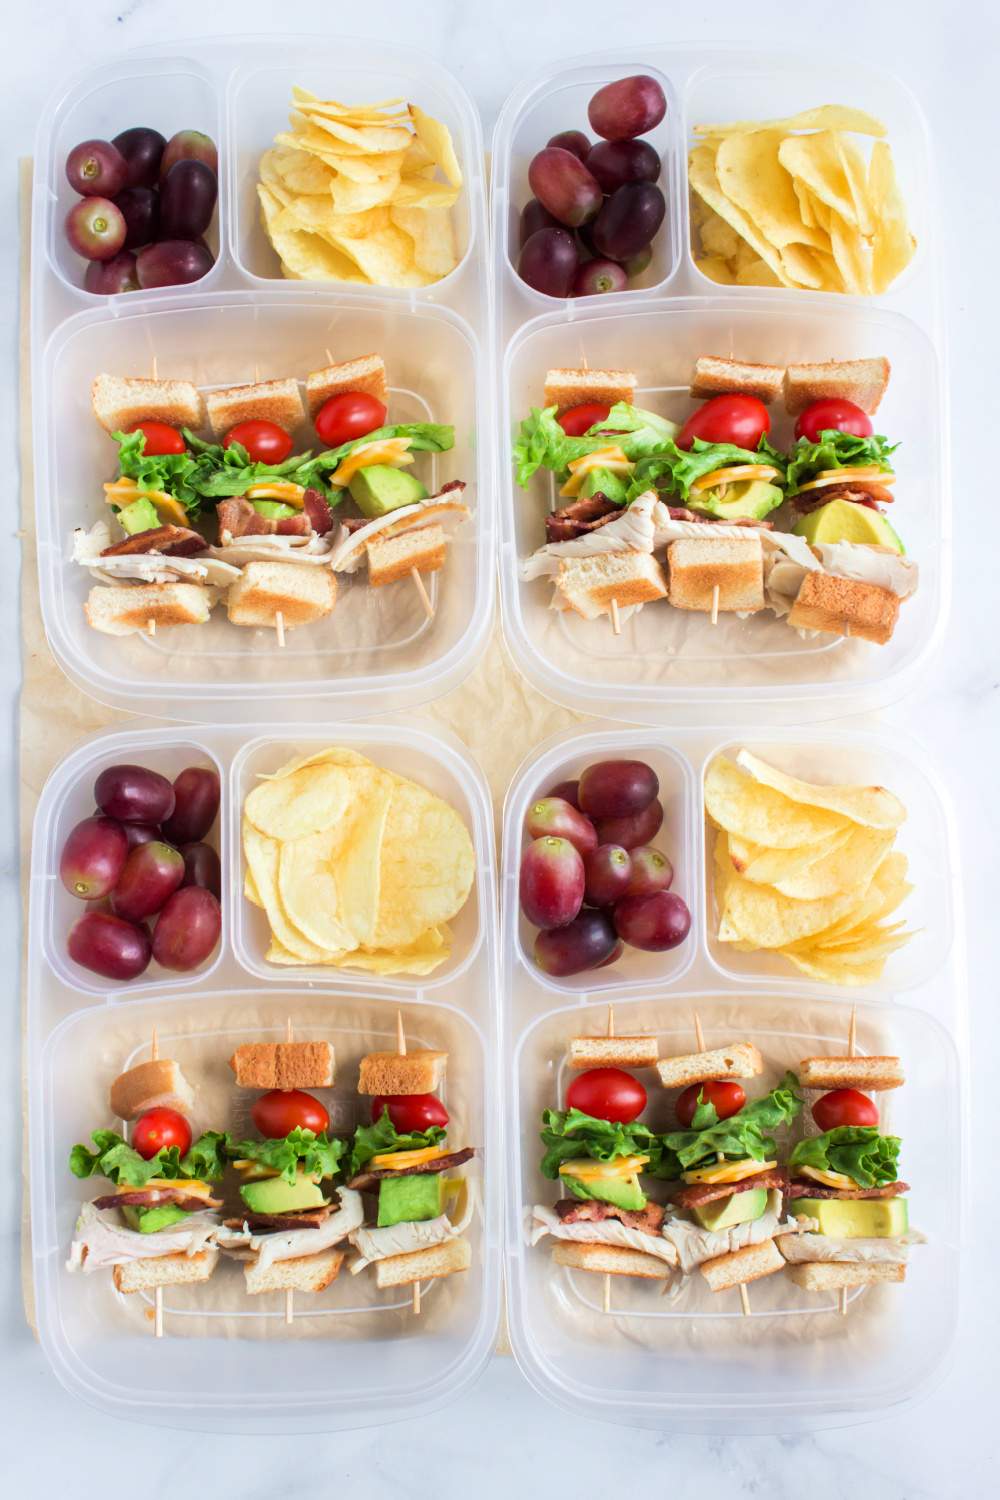 This Turkey Club Skewer Lunchbox Idea has skewers loaded with turkey, bacon, lettuce, cheese, and tomato, tucked between bread pieces. via @familyfresh